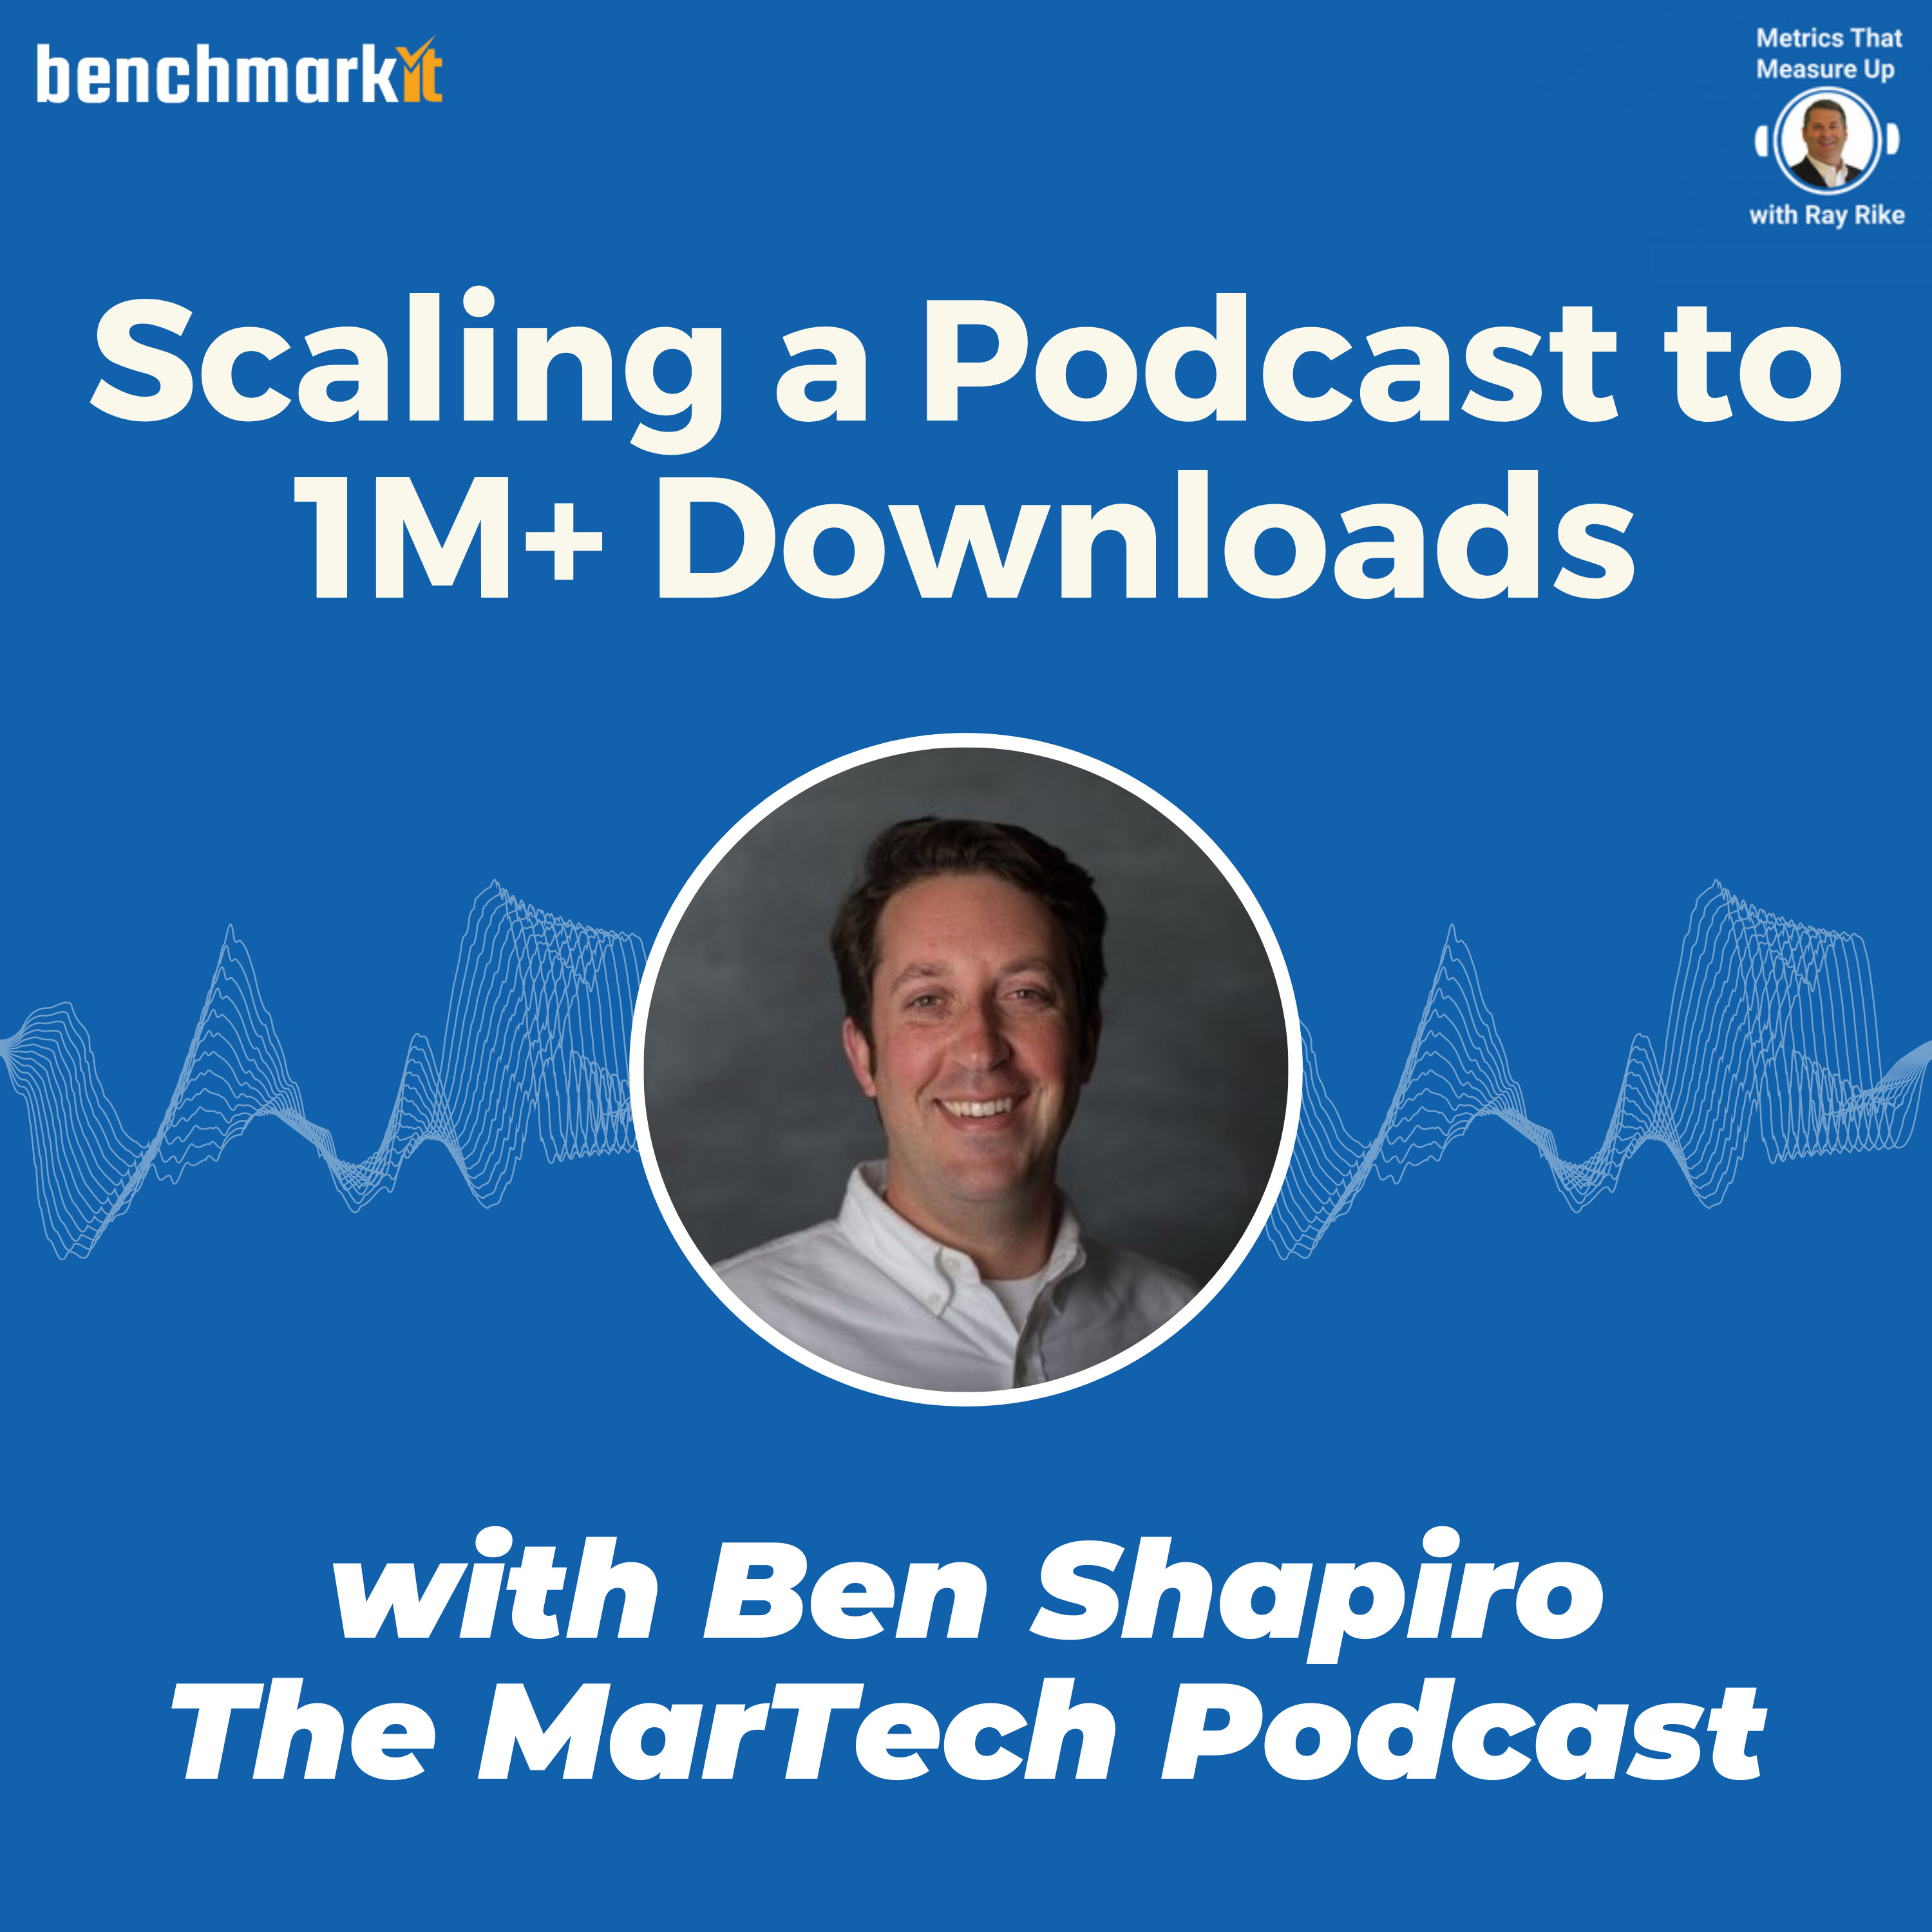 Podcasts + MarTech Metrics that Matter - with Ben Shapiro, Host of the MarTech Podcast